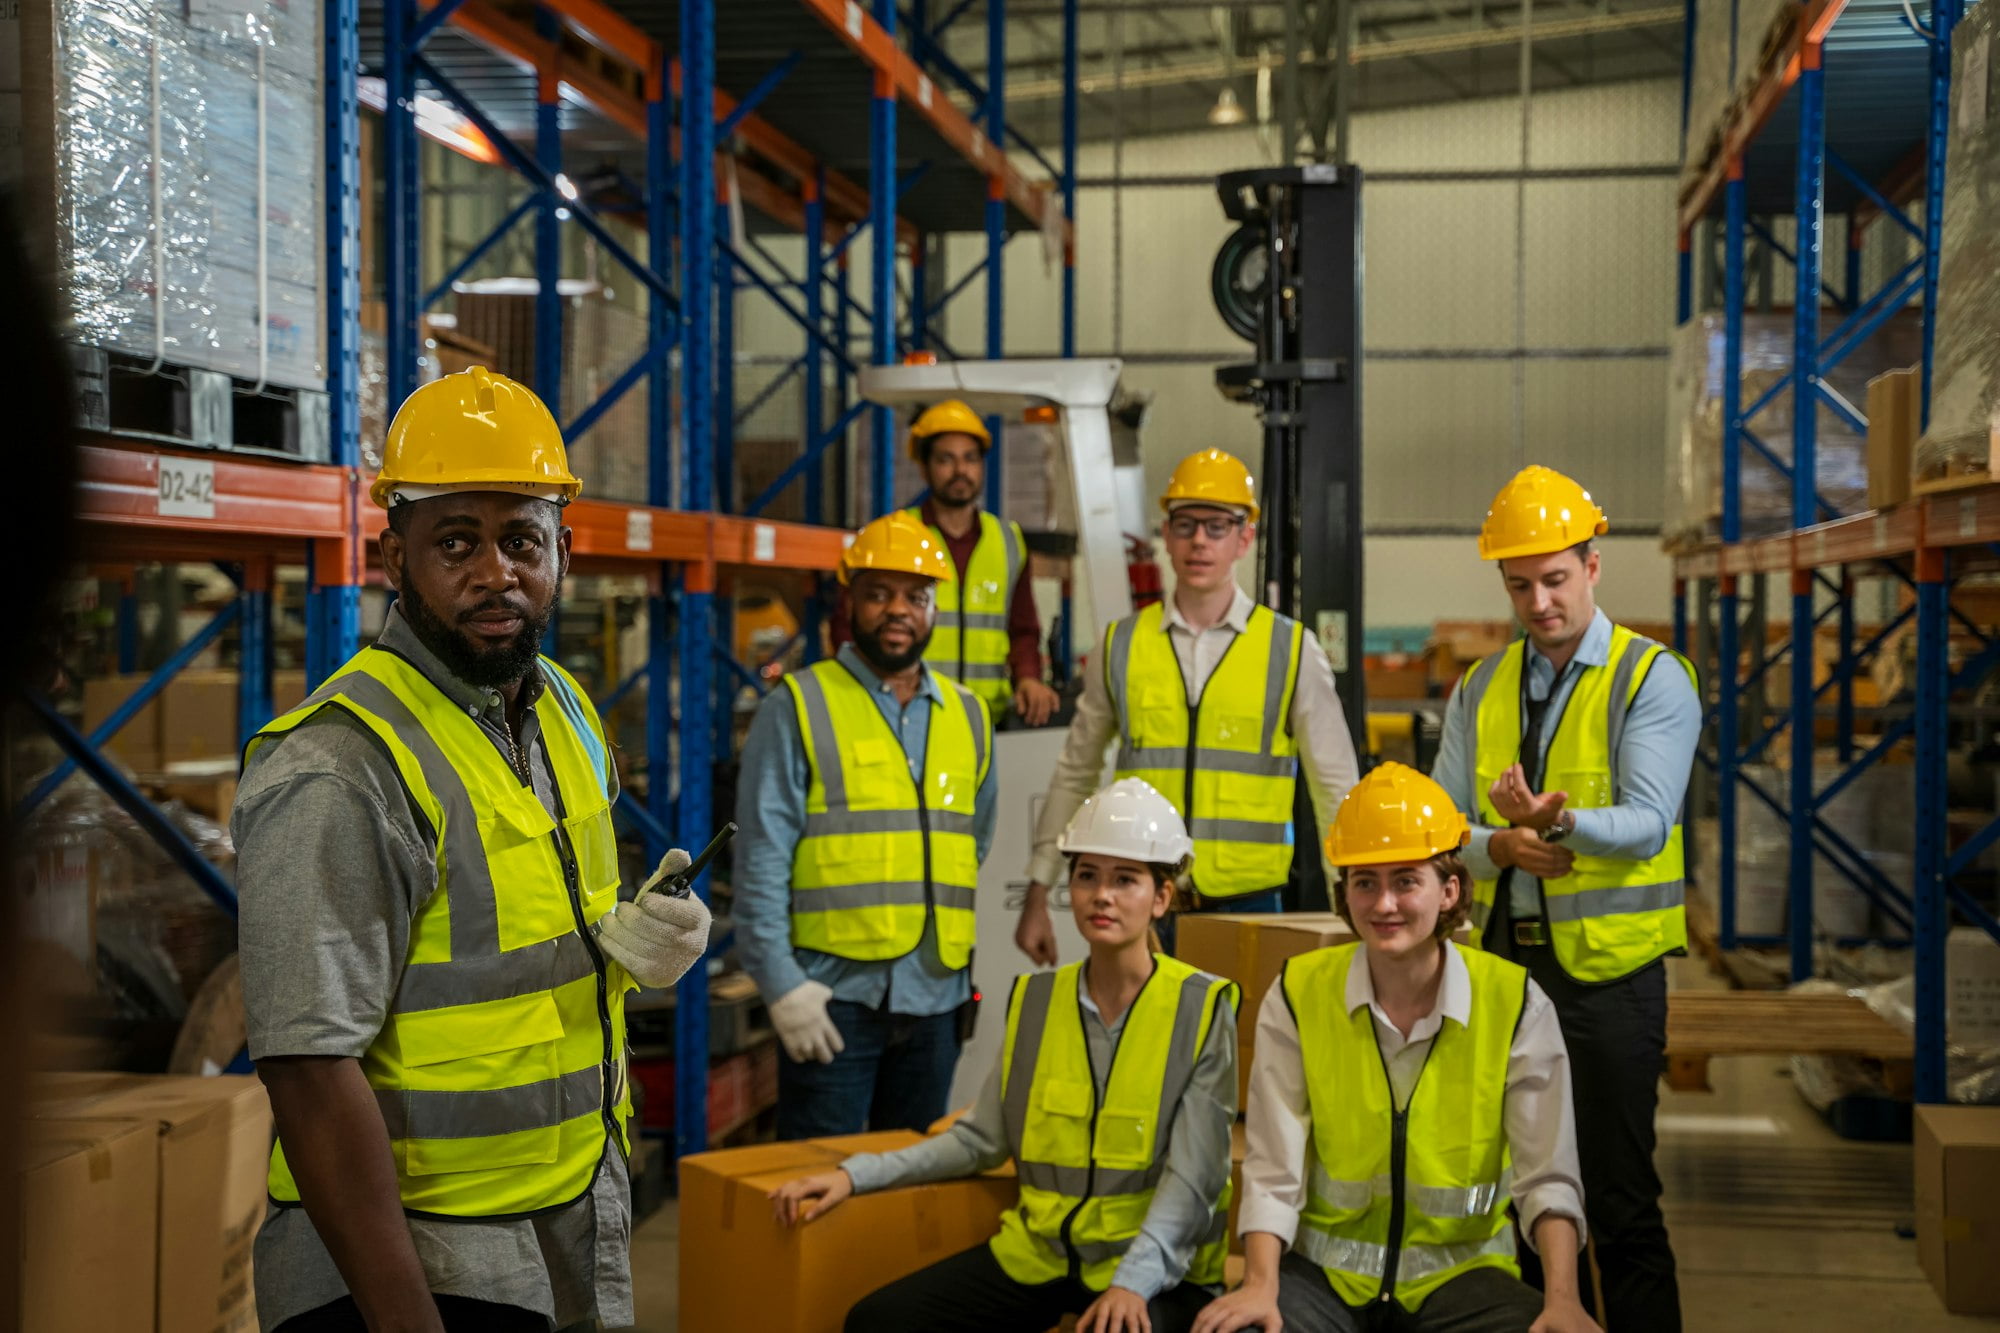 Successful warehouse team smiling happily,Cheerful logistics workers in a large warehouse.